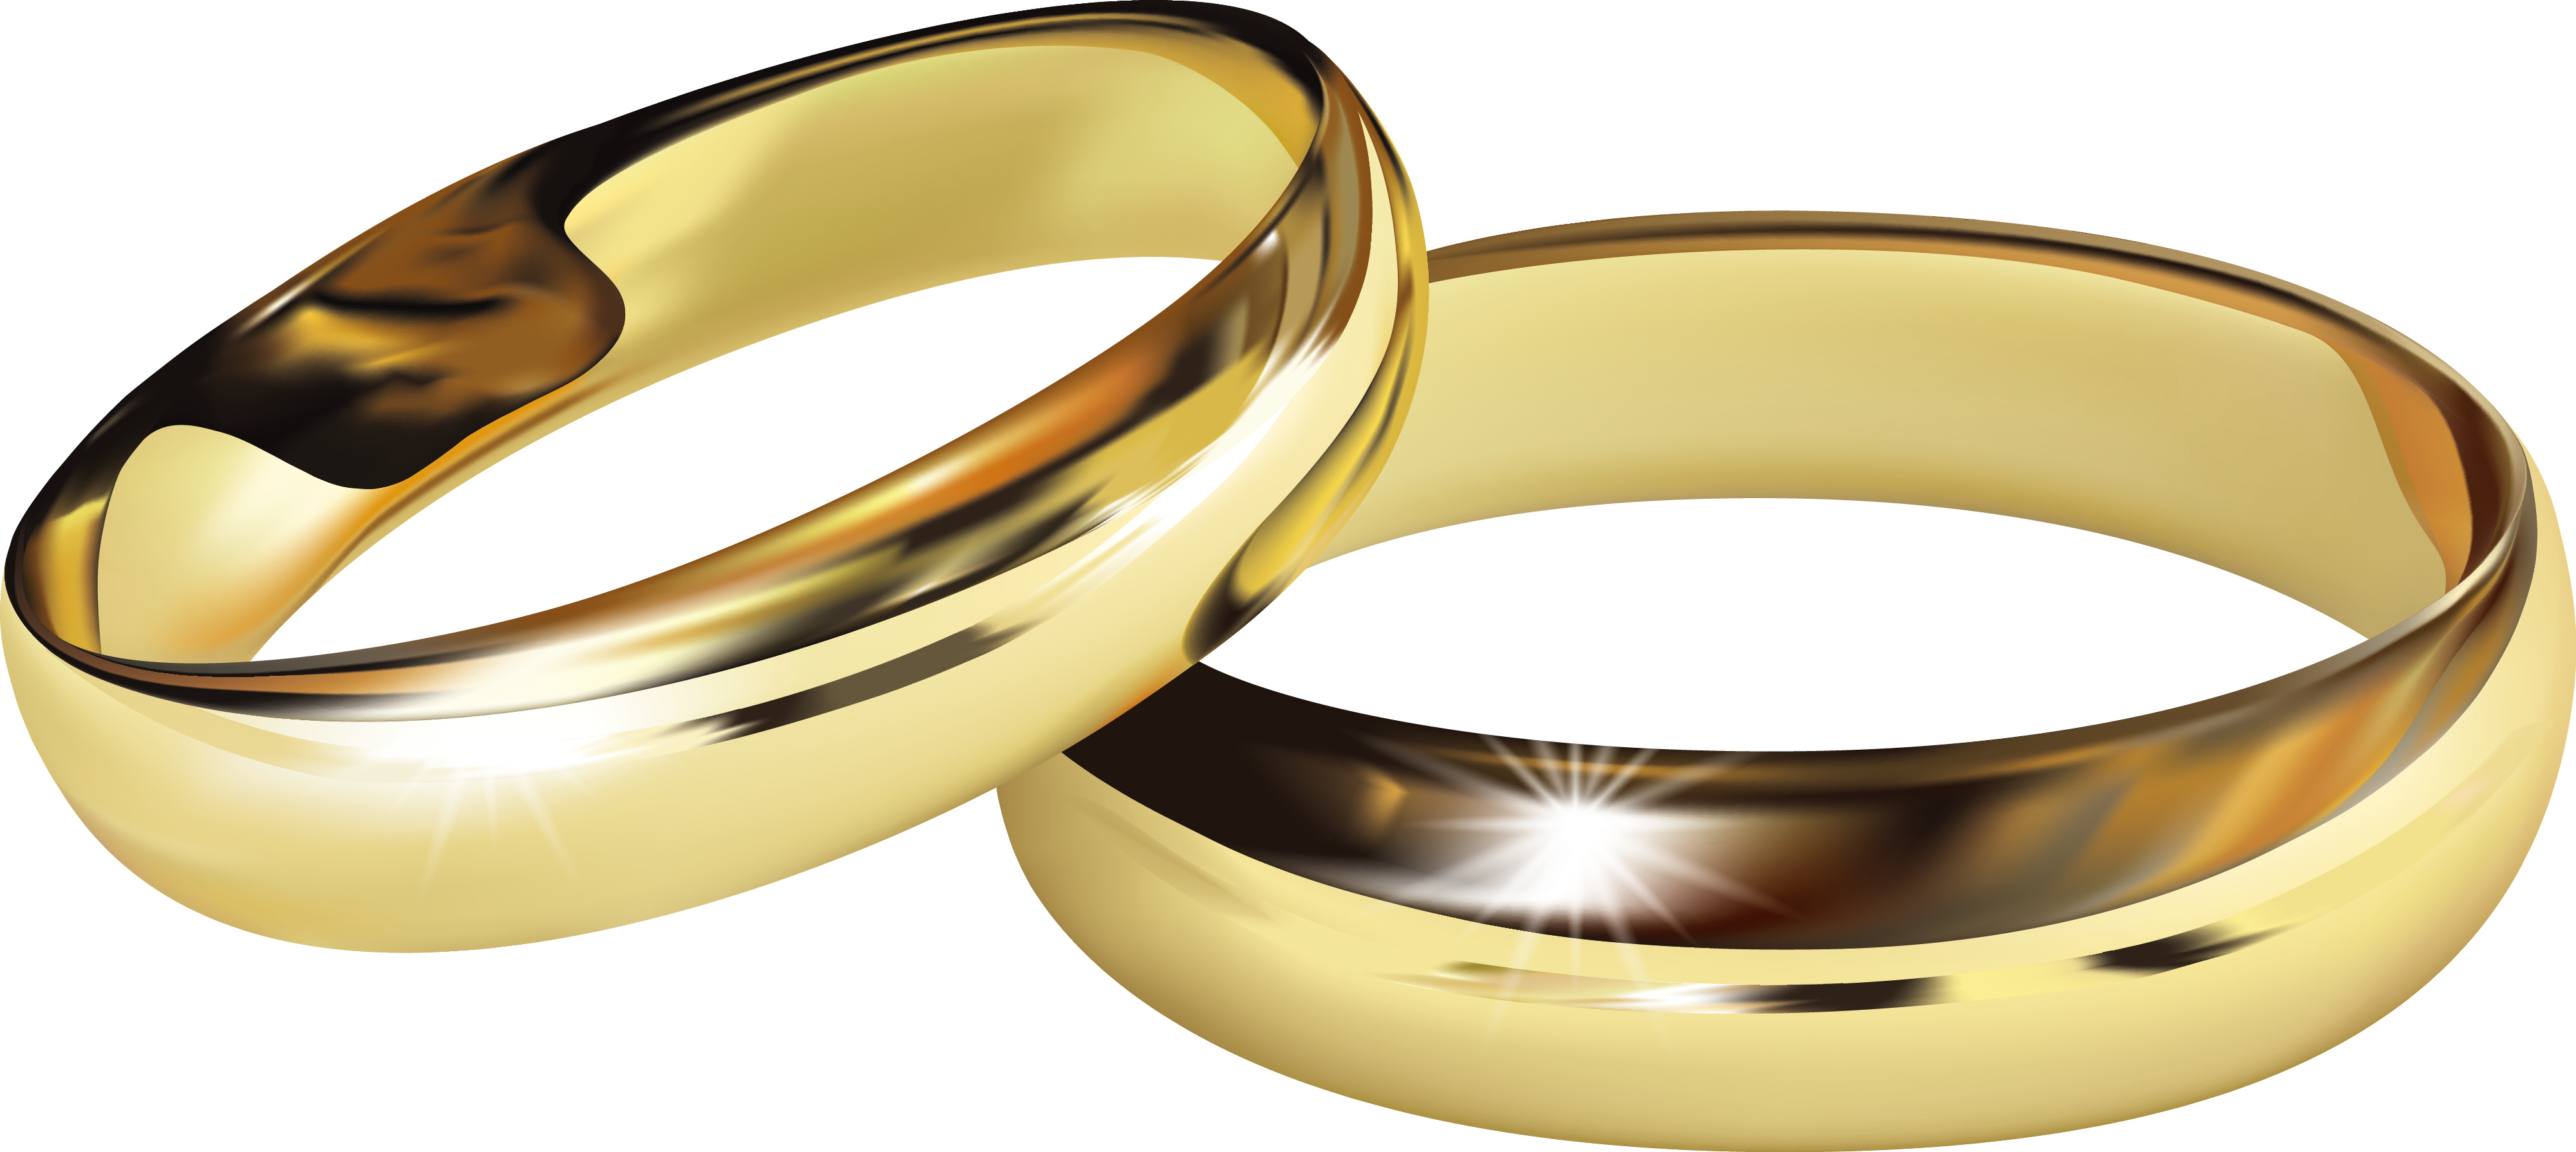 Vector Golden Ring Engagement Wedding Free Download Image Clipart